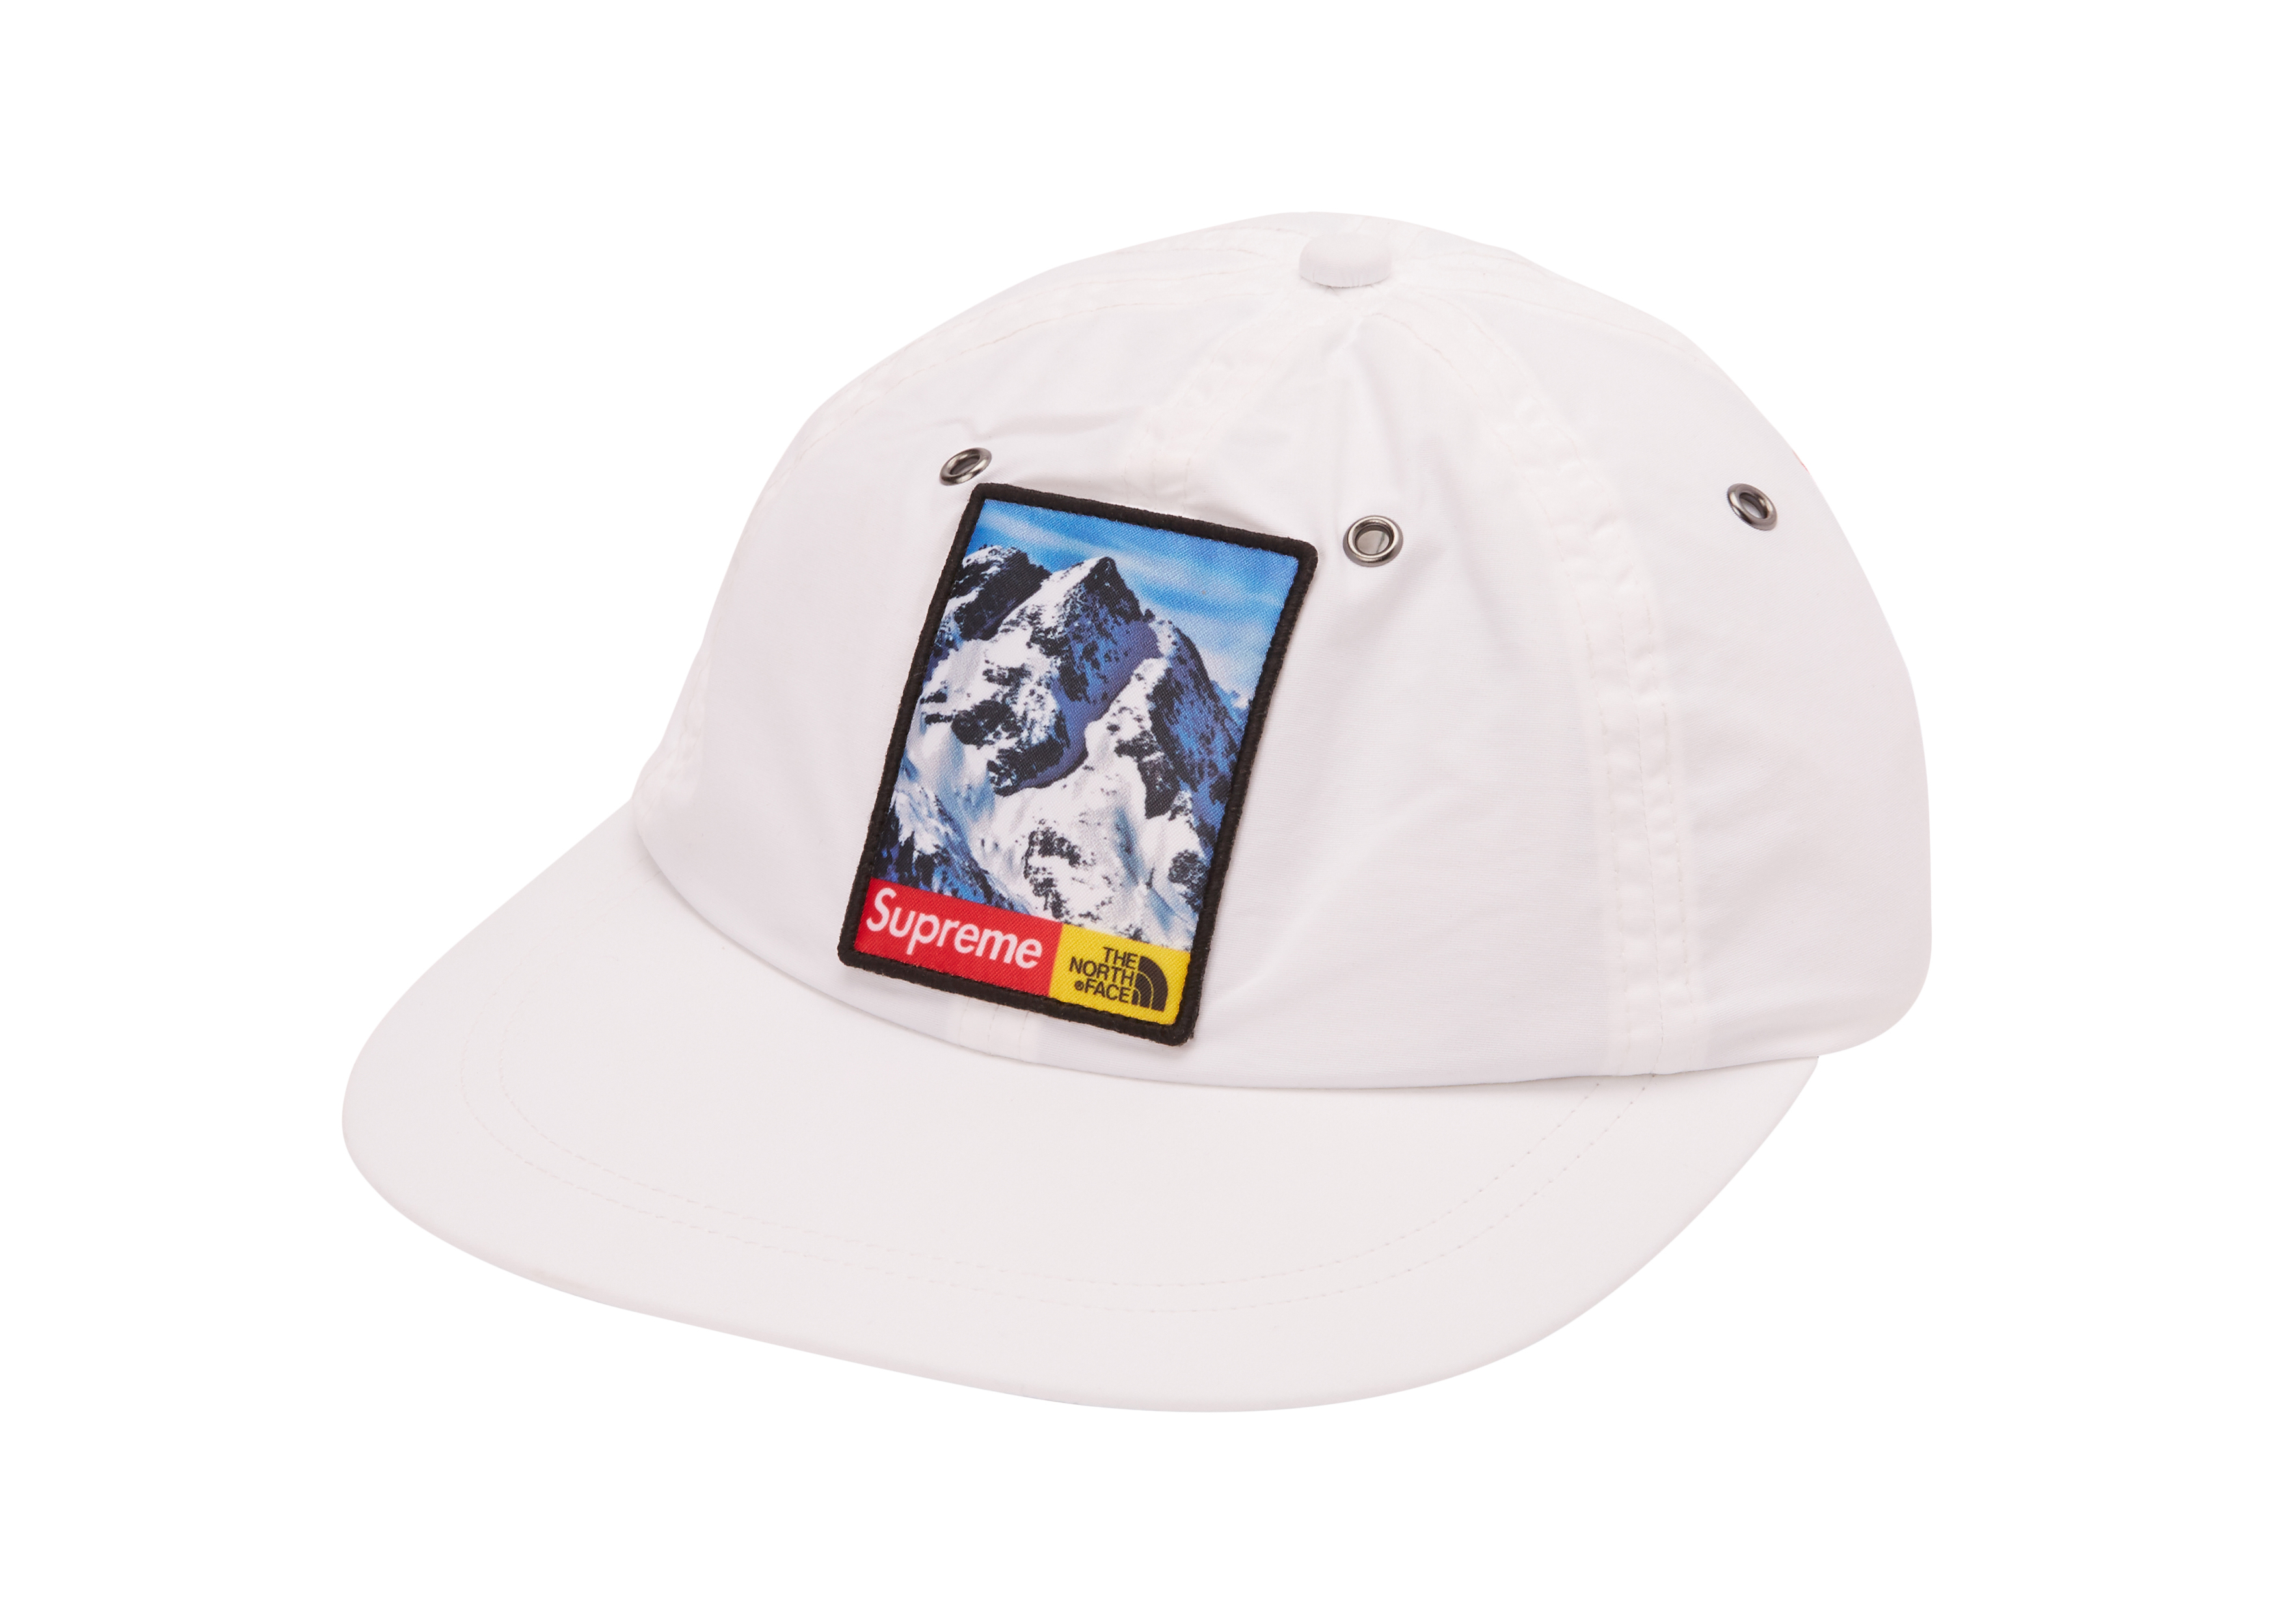 the north face cap white